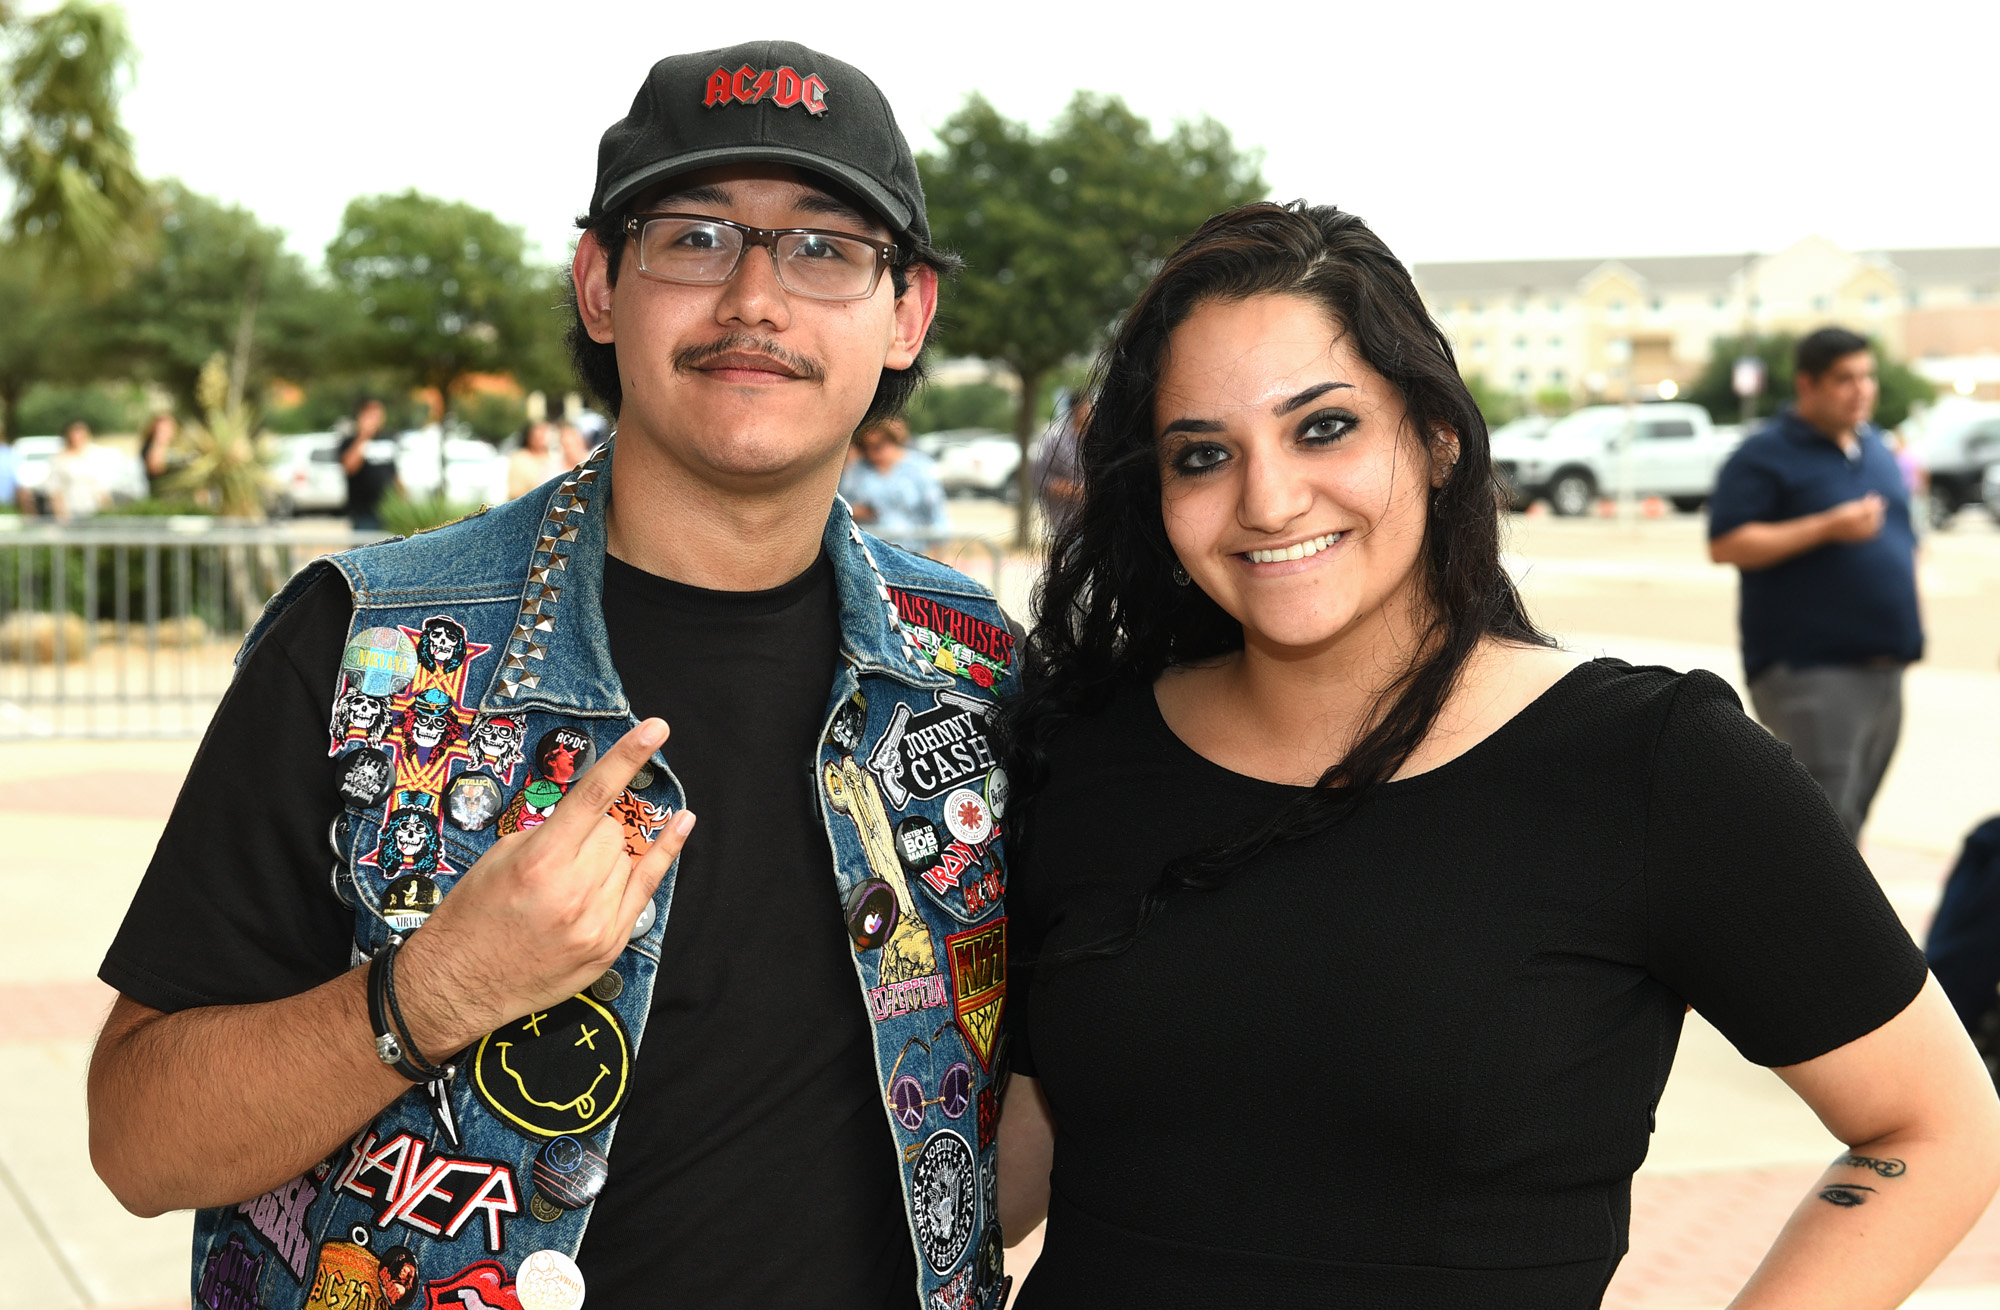 Photos show Laredo's social scene and big events throughout the summer